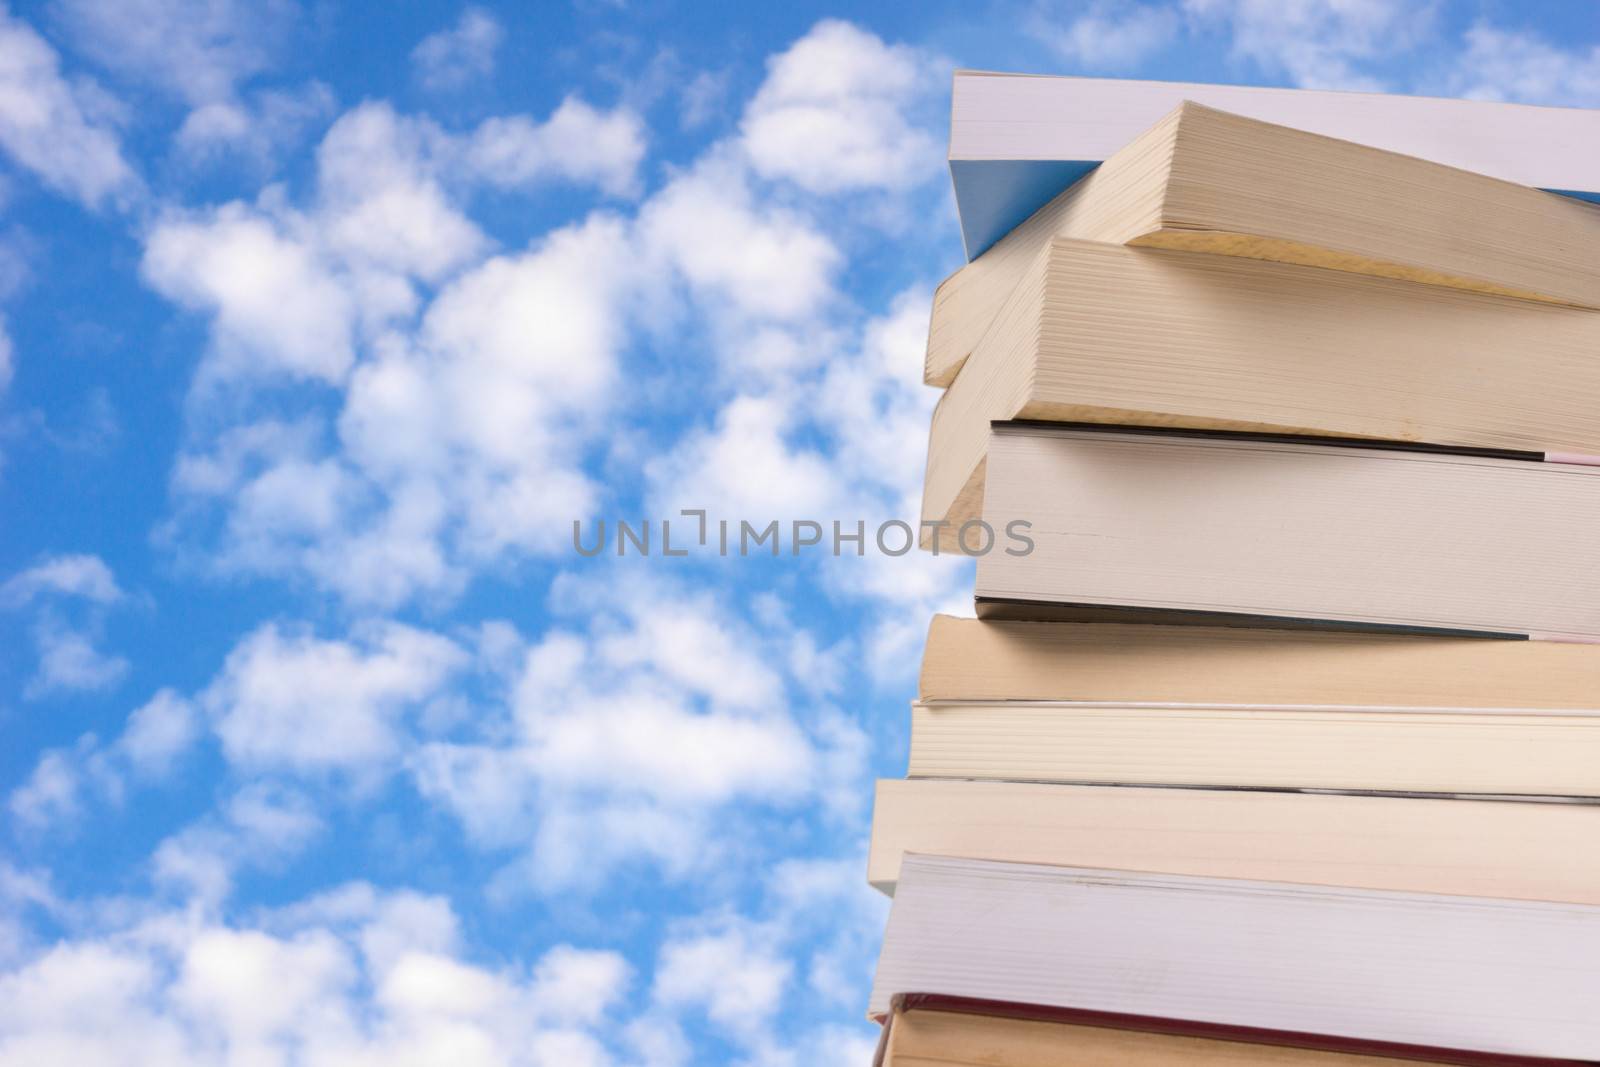 A stack of books with a sky background.